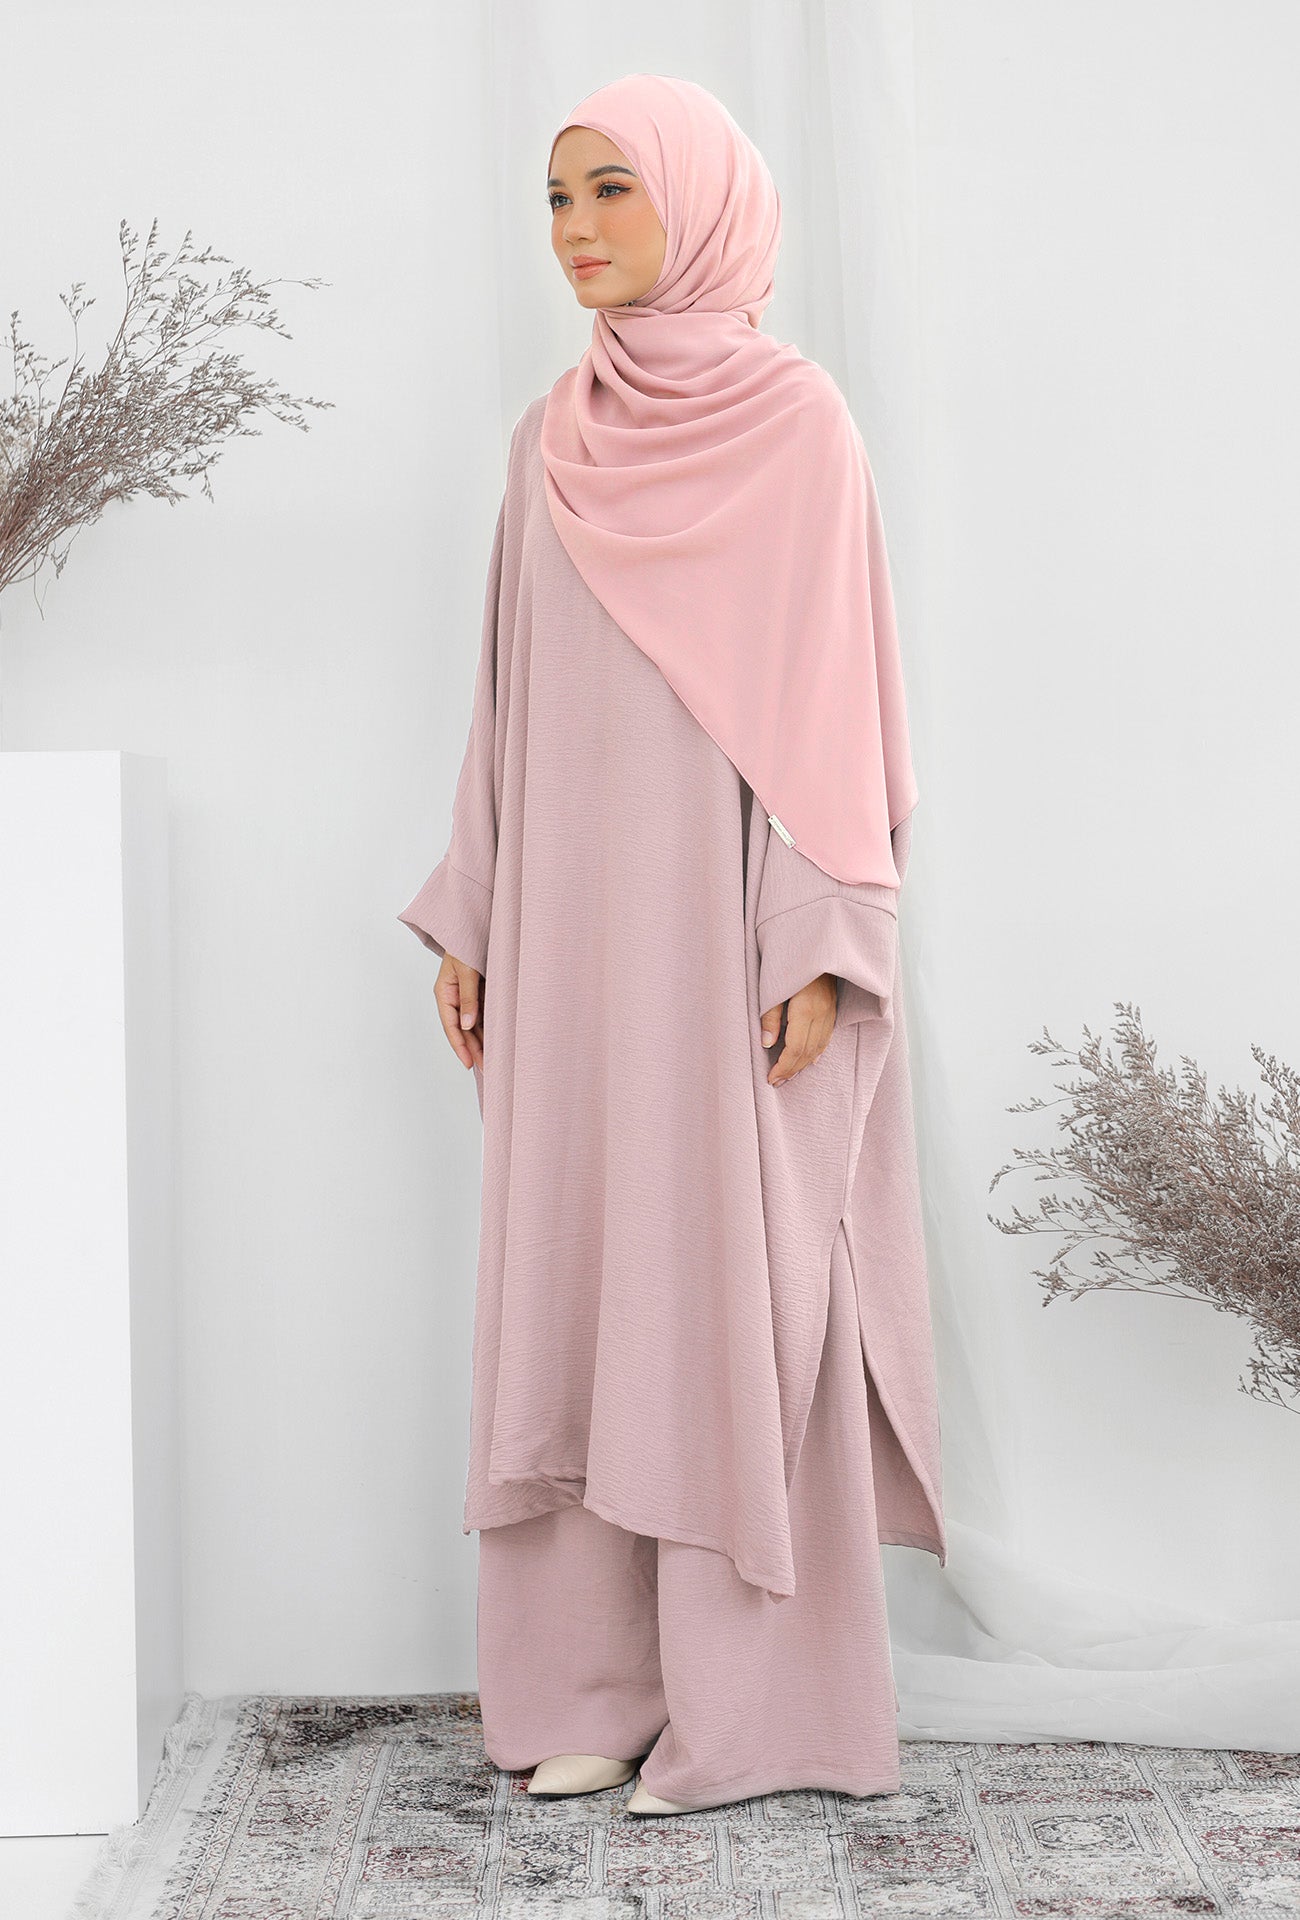 Rest & Relax Series - Serene ll in Light Pink